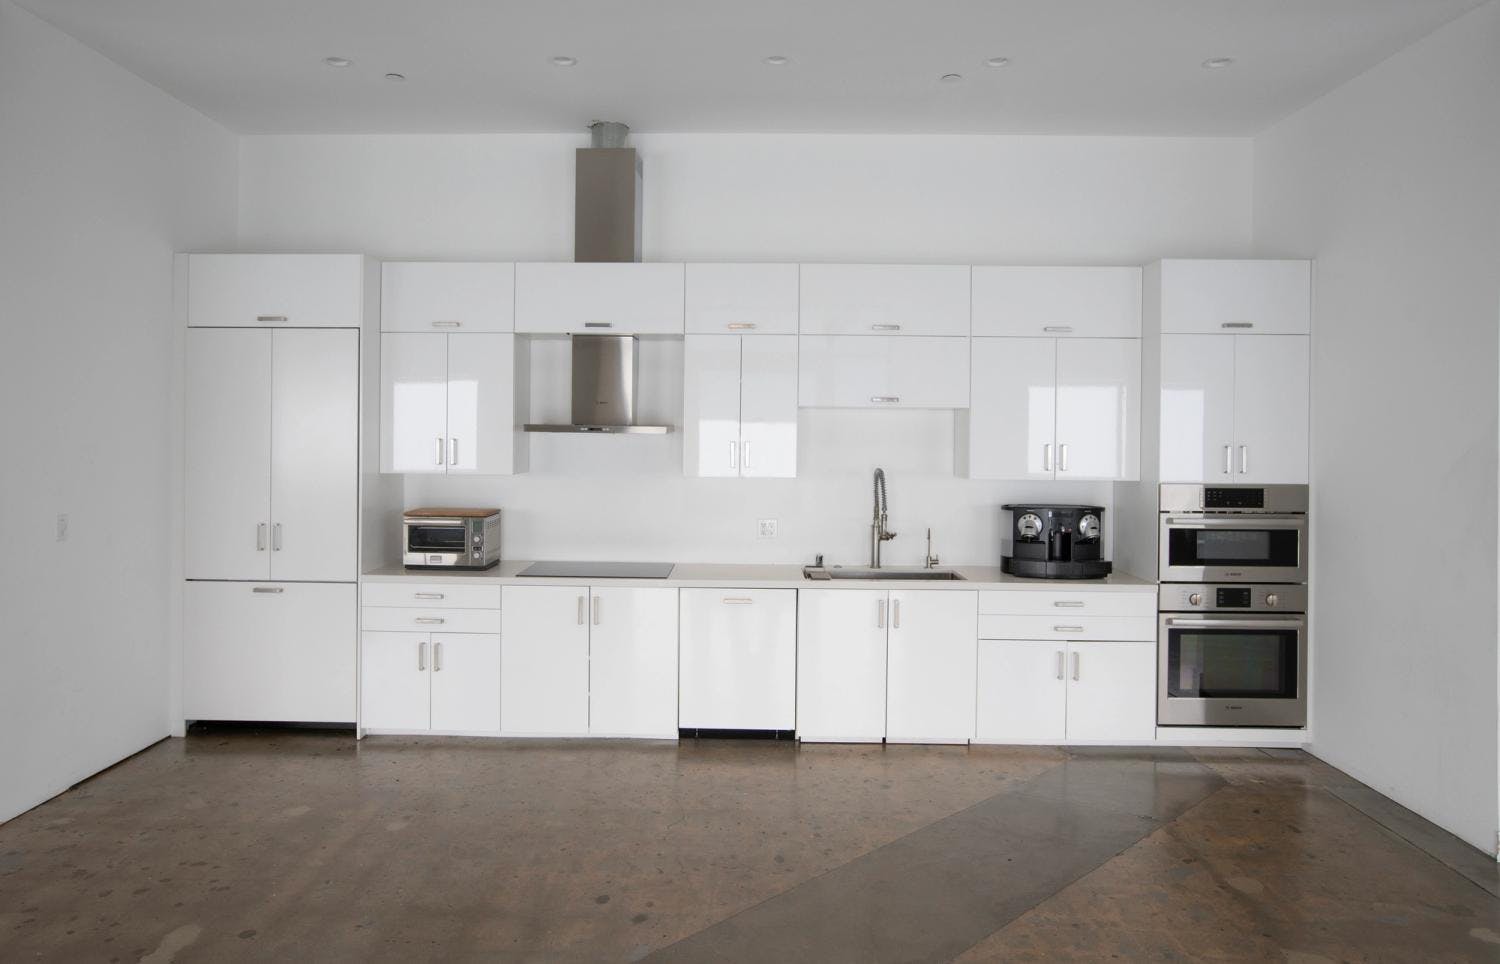 A modern studio kitchen featuring white cabinetry, stainless steel appliances, a microwave, an oven, and a coffee machine set against a white wall, with polished concrete floors.